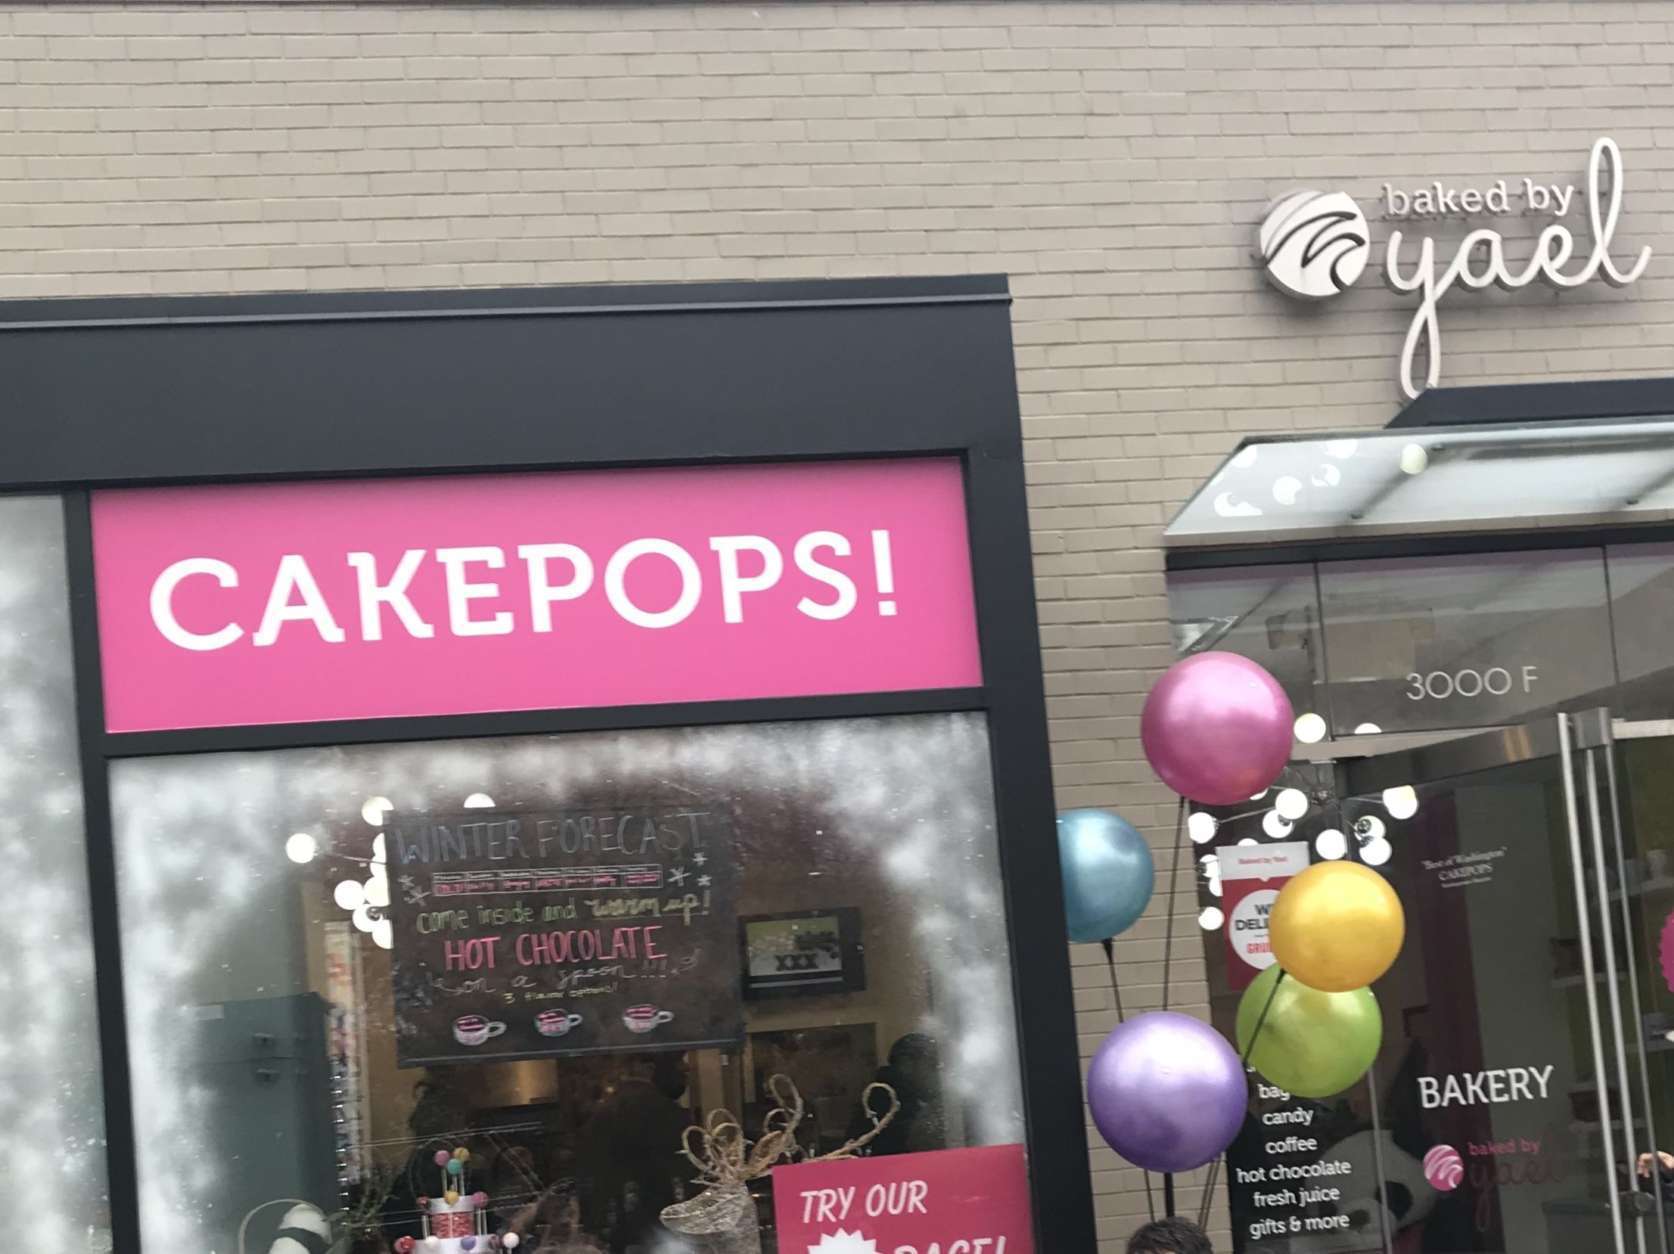 "We make everything from scratch, all of our cake pops, bagels, black and white cookies and everything else," said owner Yael Krigman, a lawyer, who left a big D.C. law firm to start her bakery business several years ago, "We've grown from one employee to almost three dozen employees. The vast majority are D.C. residents," she said. (WTOP/Dick Uliano) 